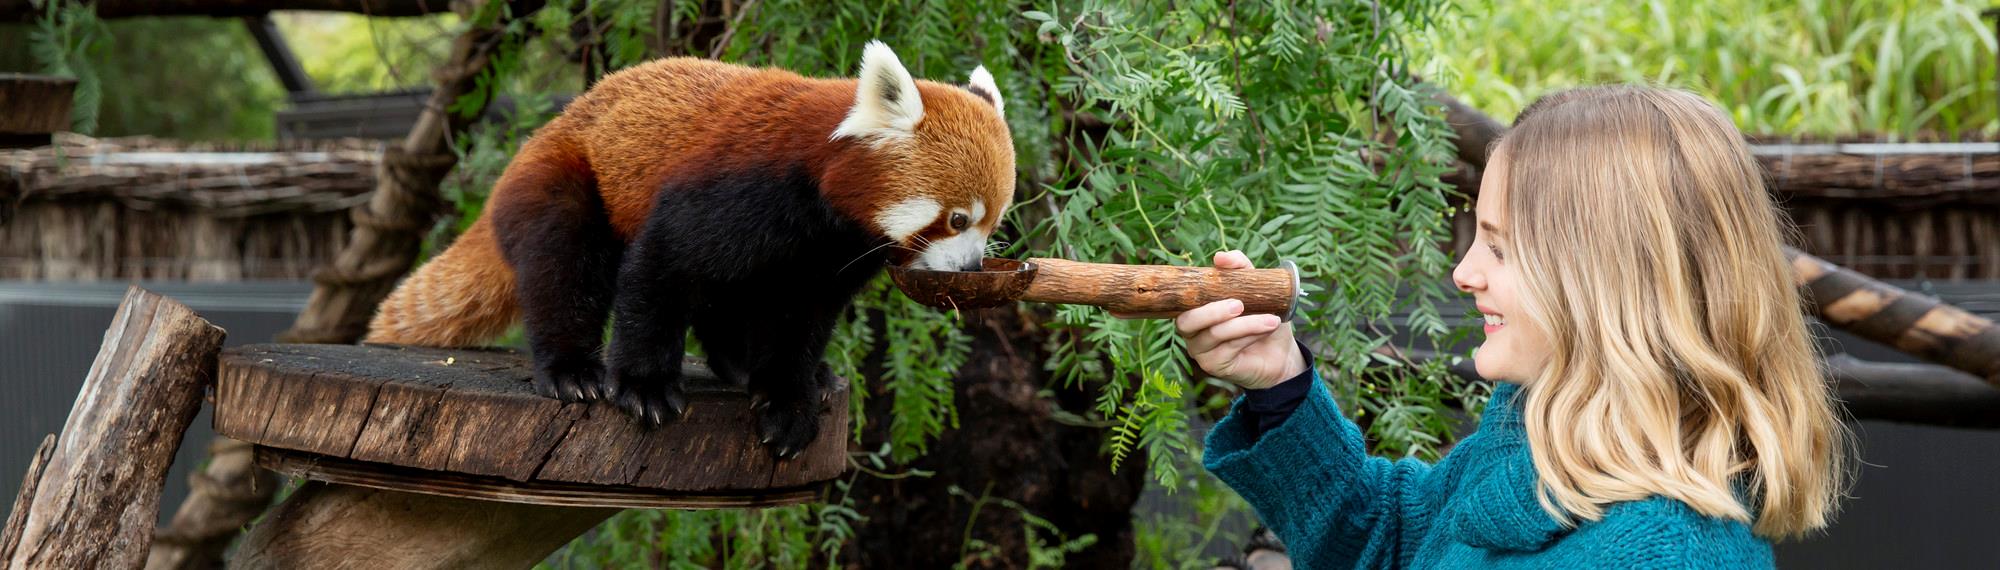 A Red Panda, on the left, getting a feed from a Staff Member holding a wooden spoon, on the right.